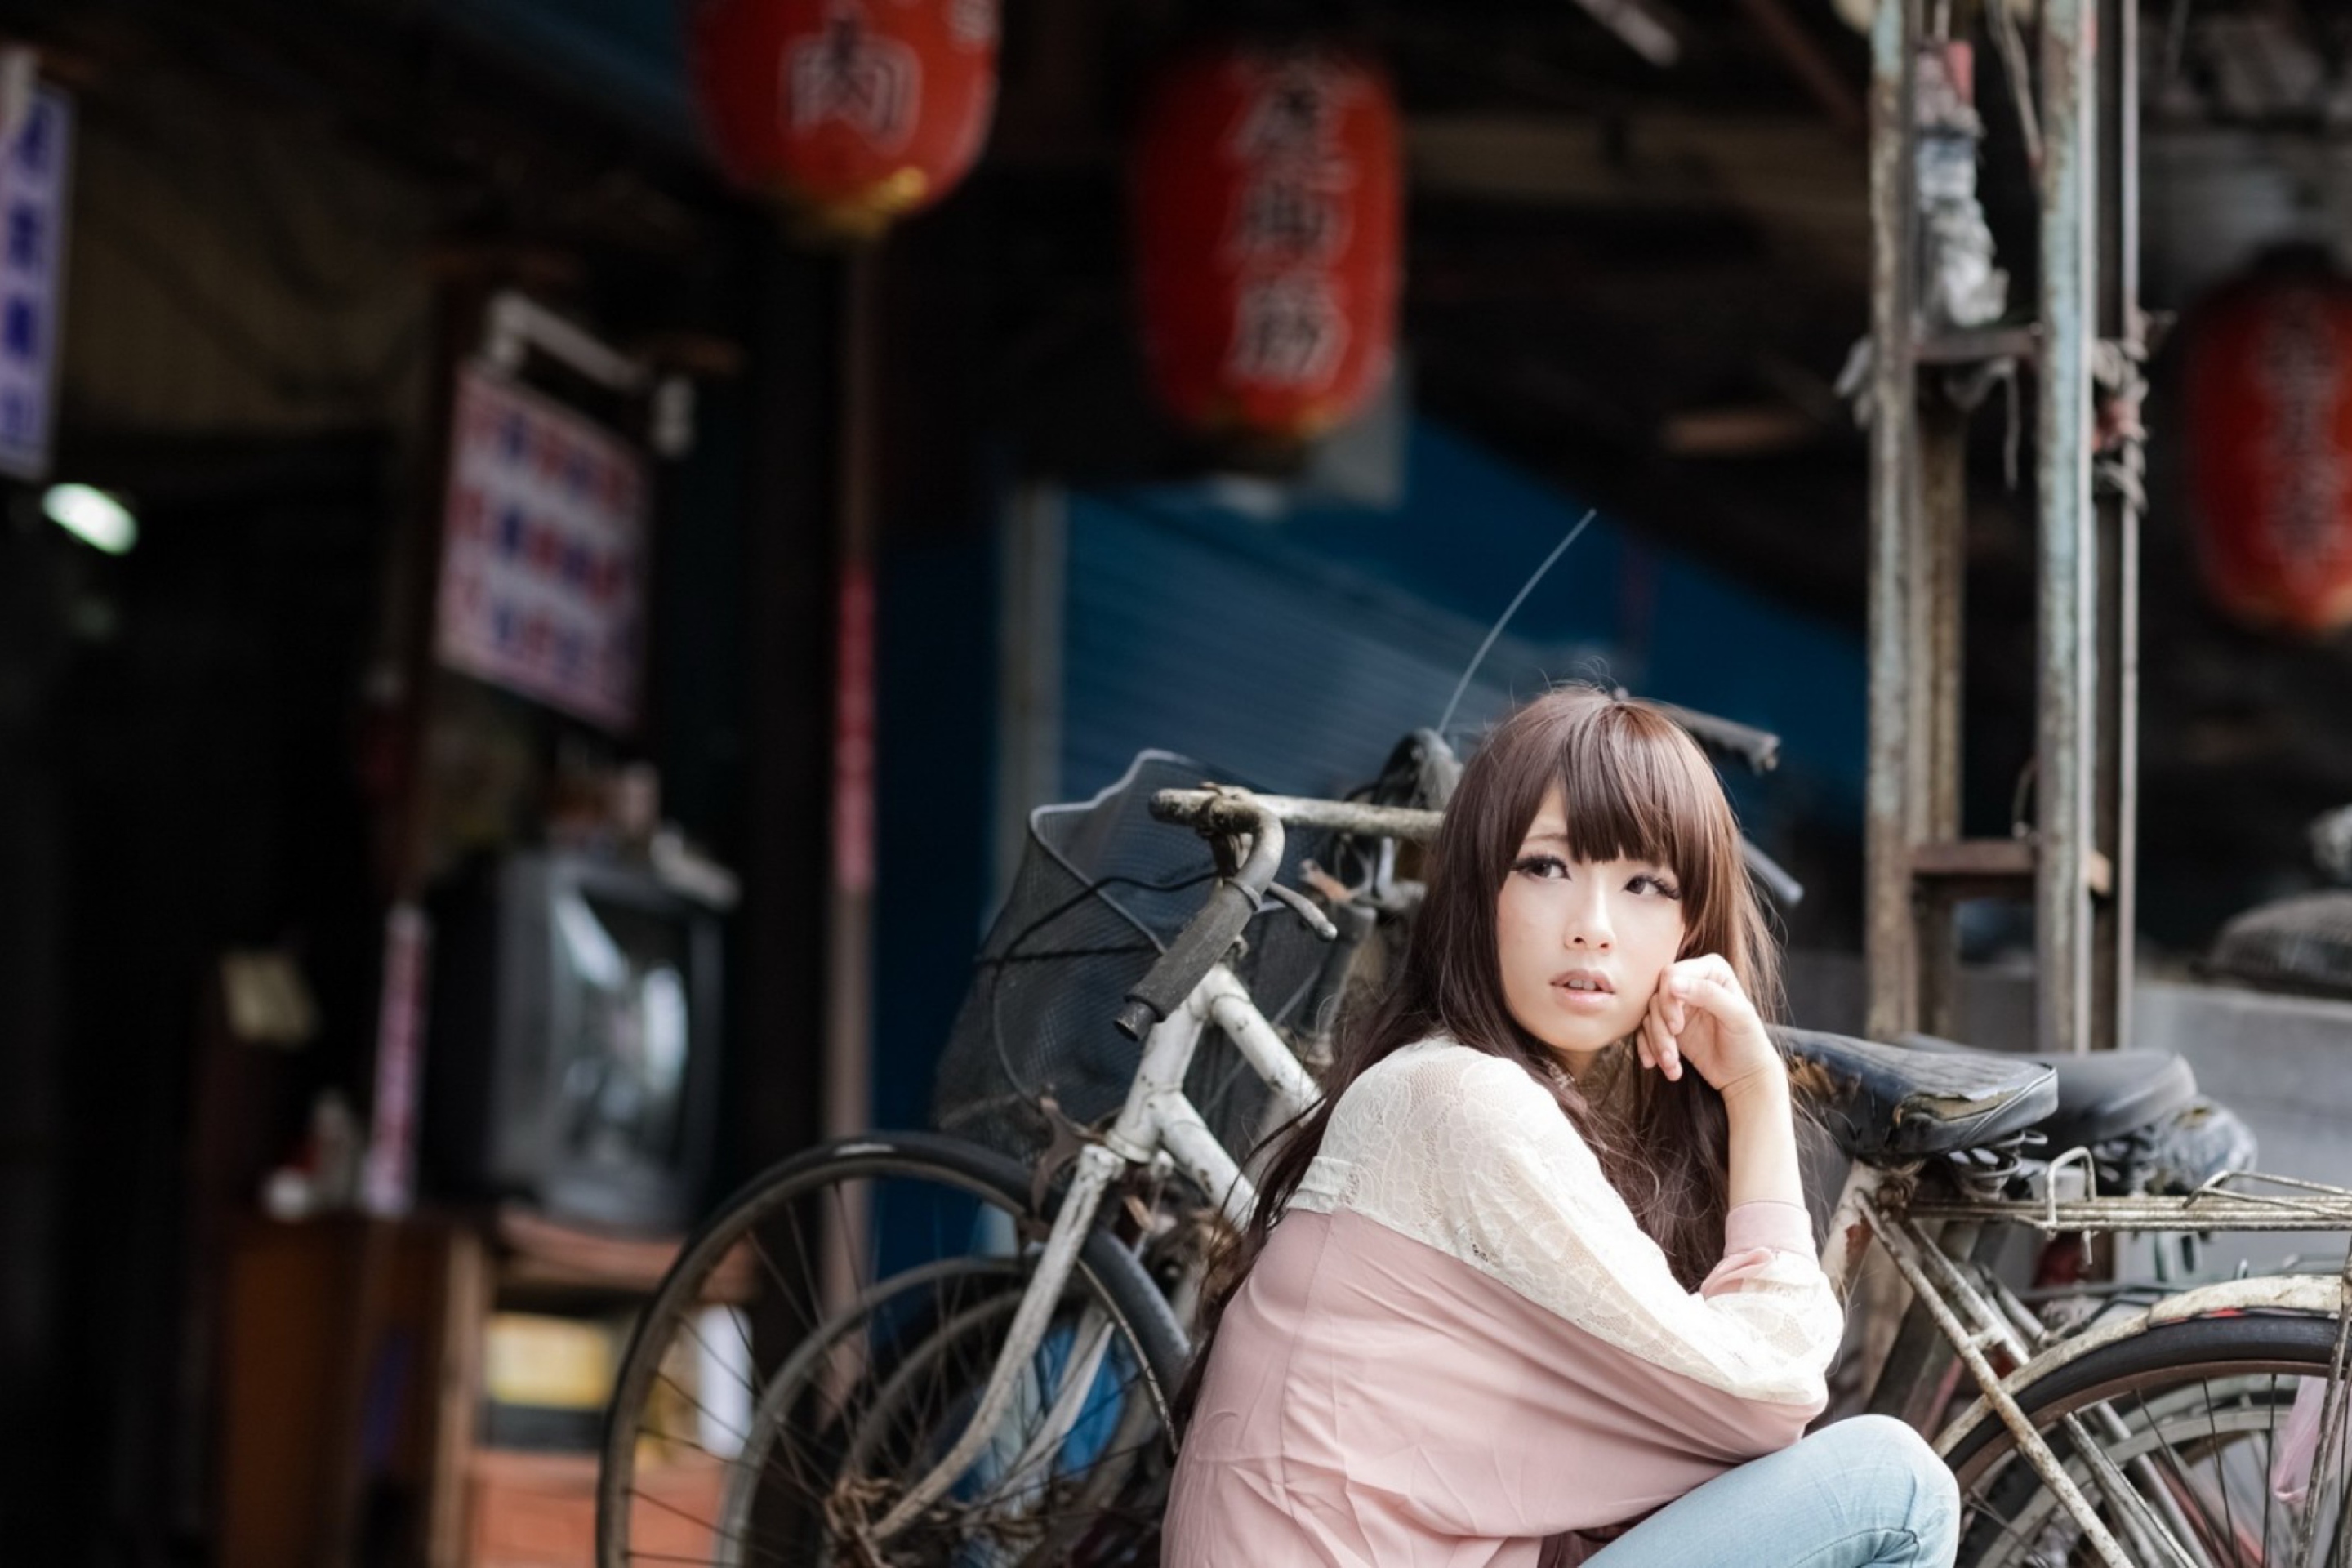 Das Cute Asian Girl With Bicycle Wallpaper 2880x1920